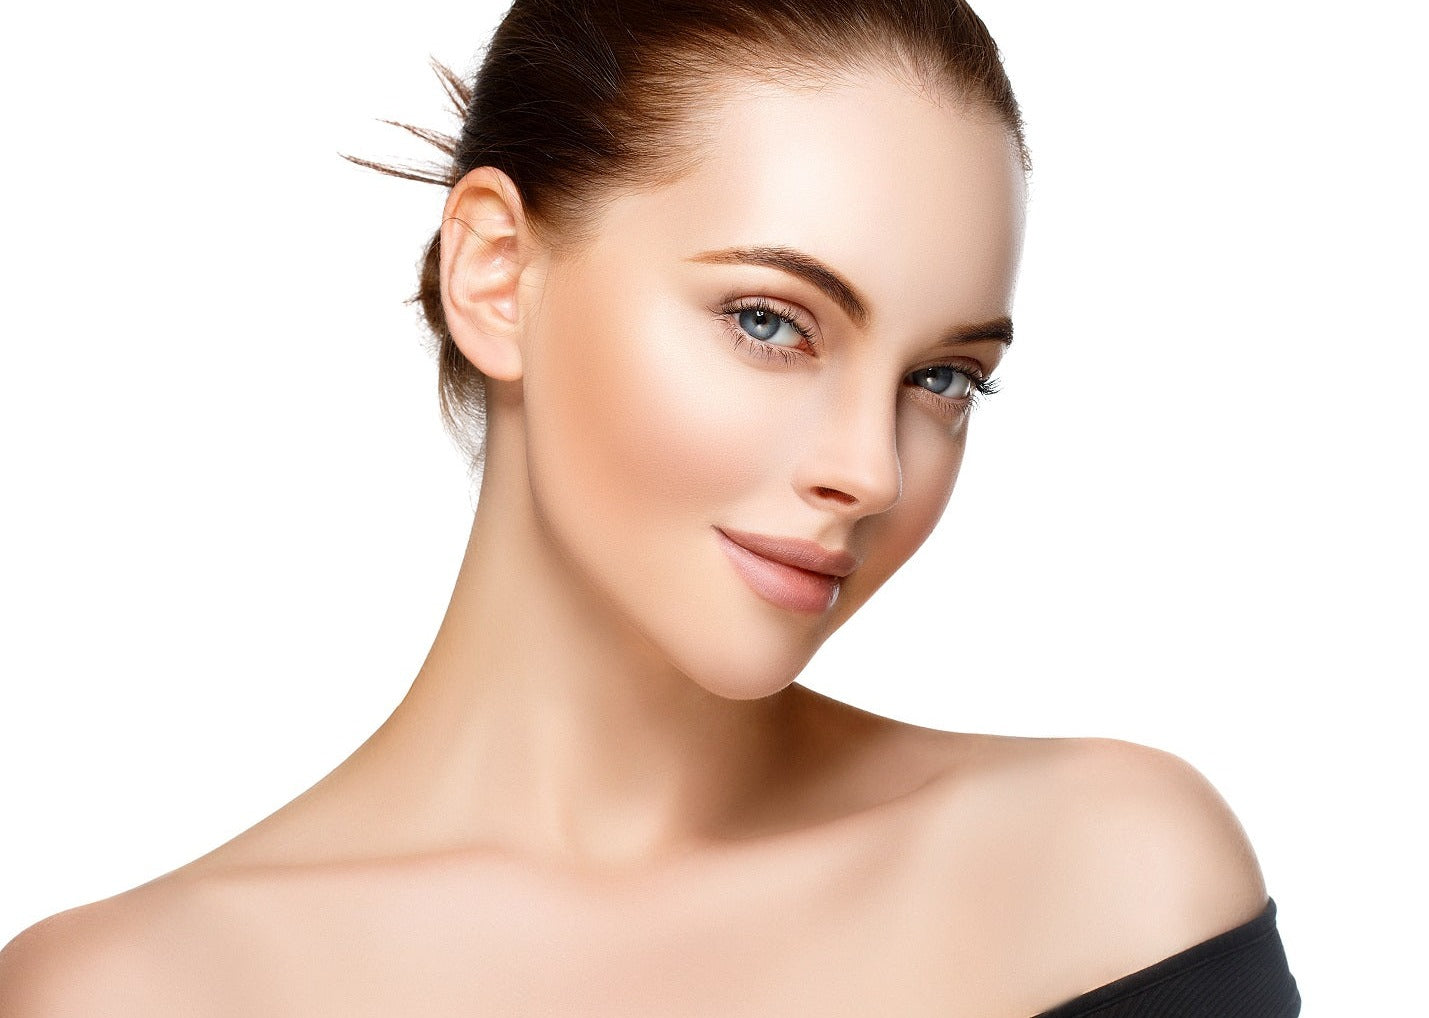 Ultimate Facial Aesthetics Package: Anti-Wrinkle, Lip Filler 0.5ml, Profhilo & Under Eye Boosters (save €446)